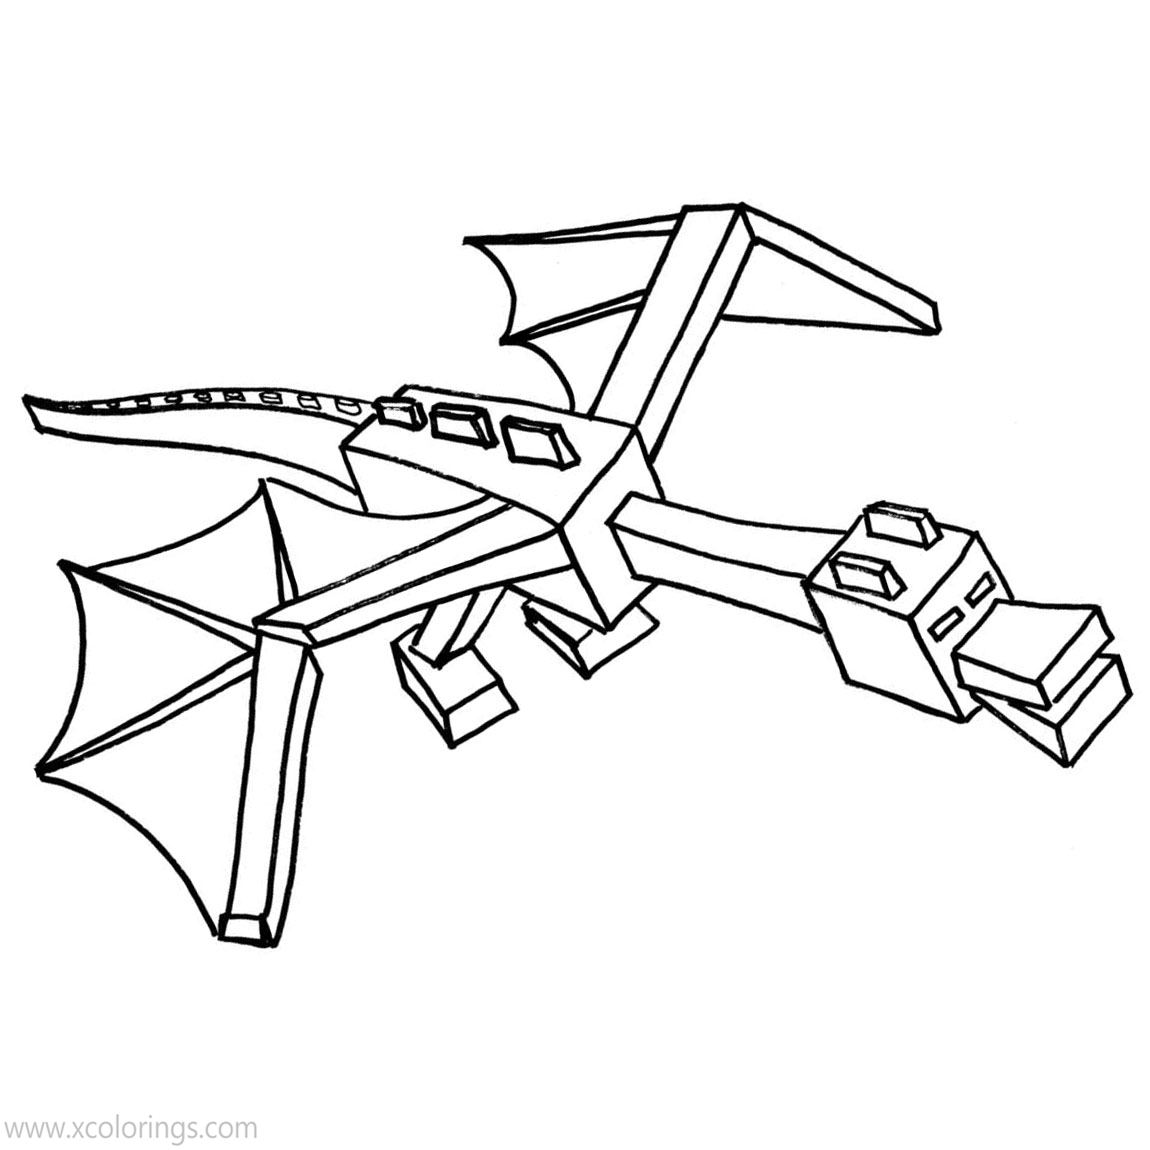 Animal Minecraft Dragon Coloring Pages for Kindergarten